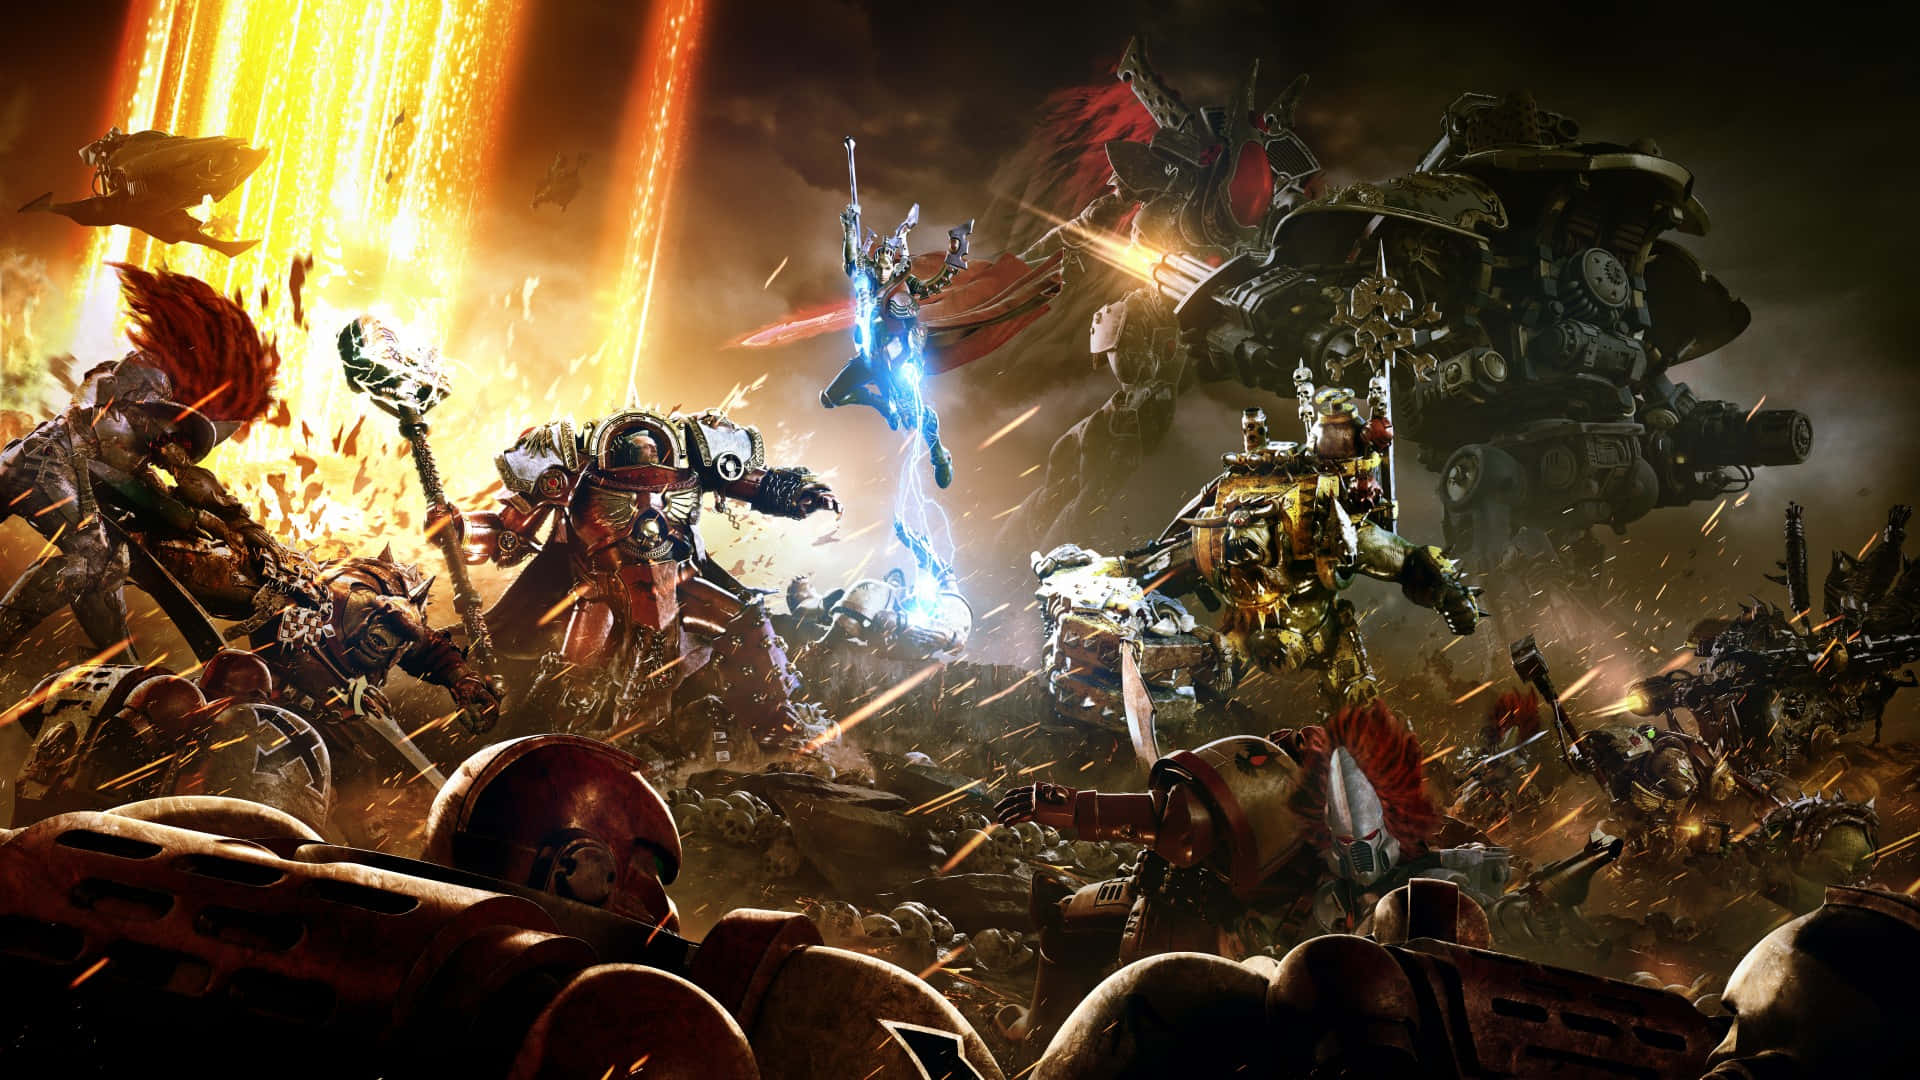 Sharpen Your Blades And Join The War On Dawn Of War III